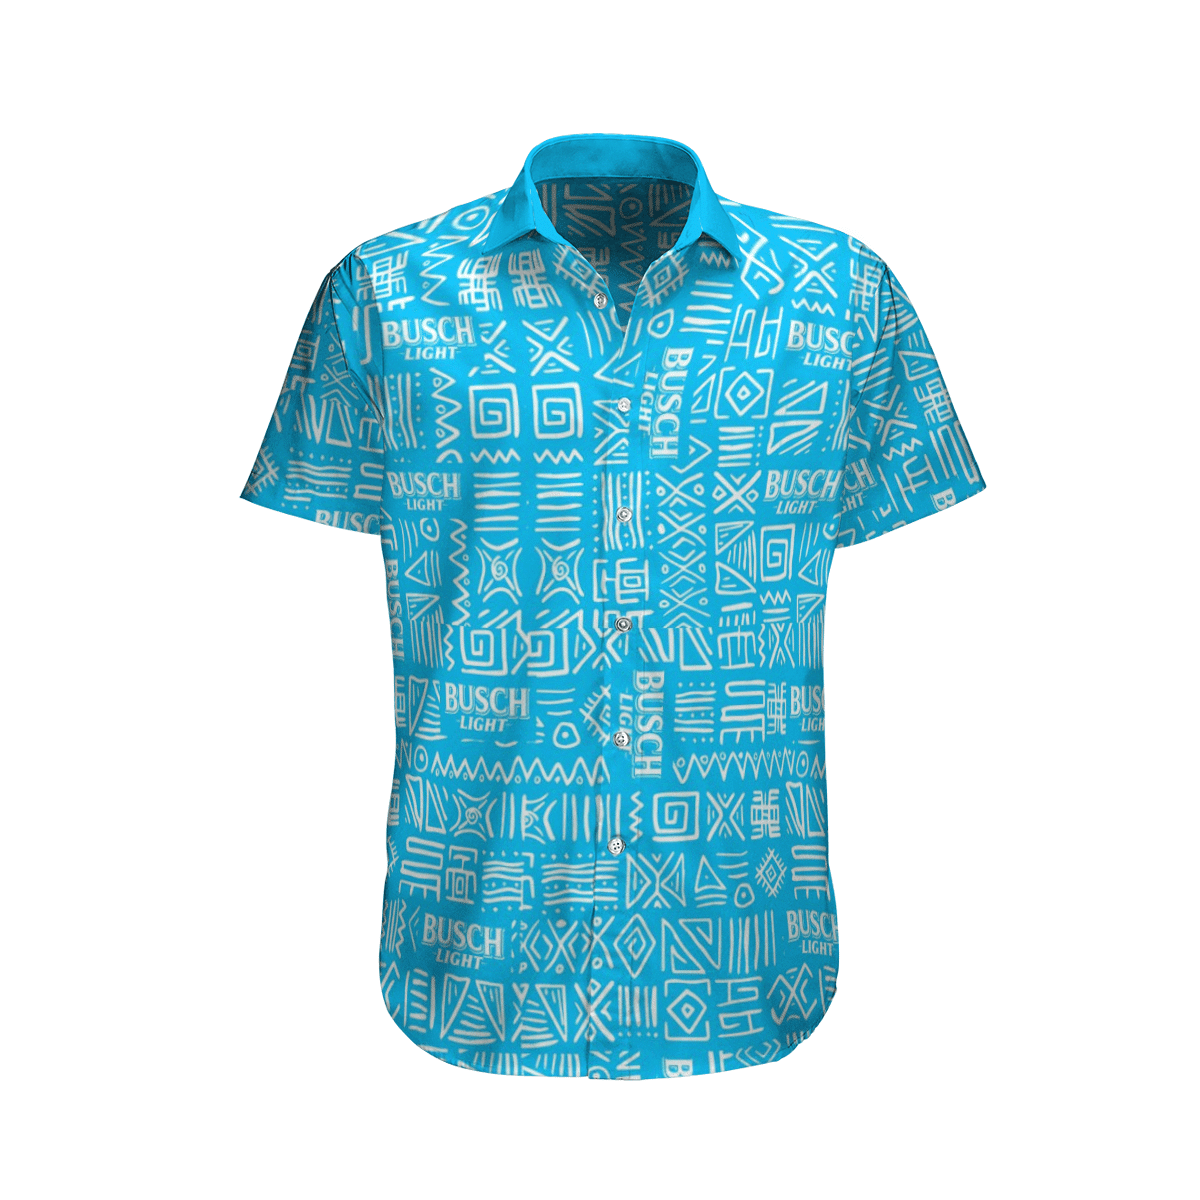 Top cool Hawaiian shirt 2022 - Make sure you get yours today before they run out! 11